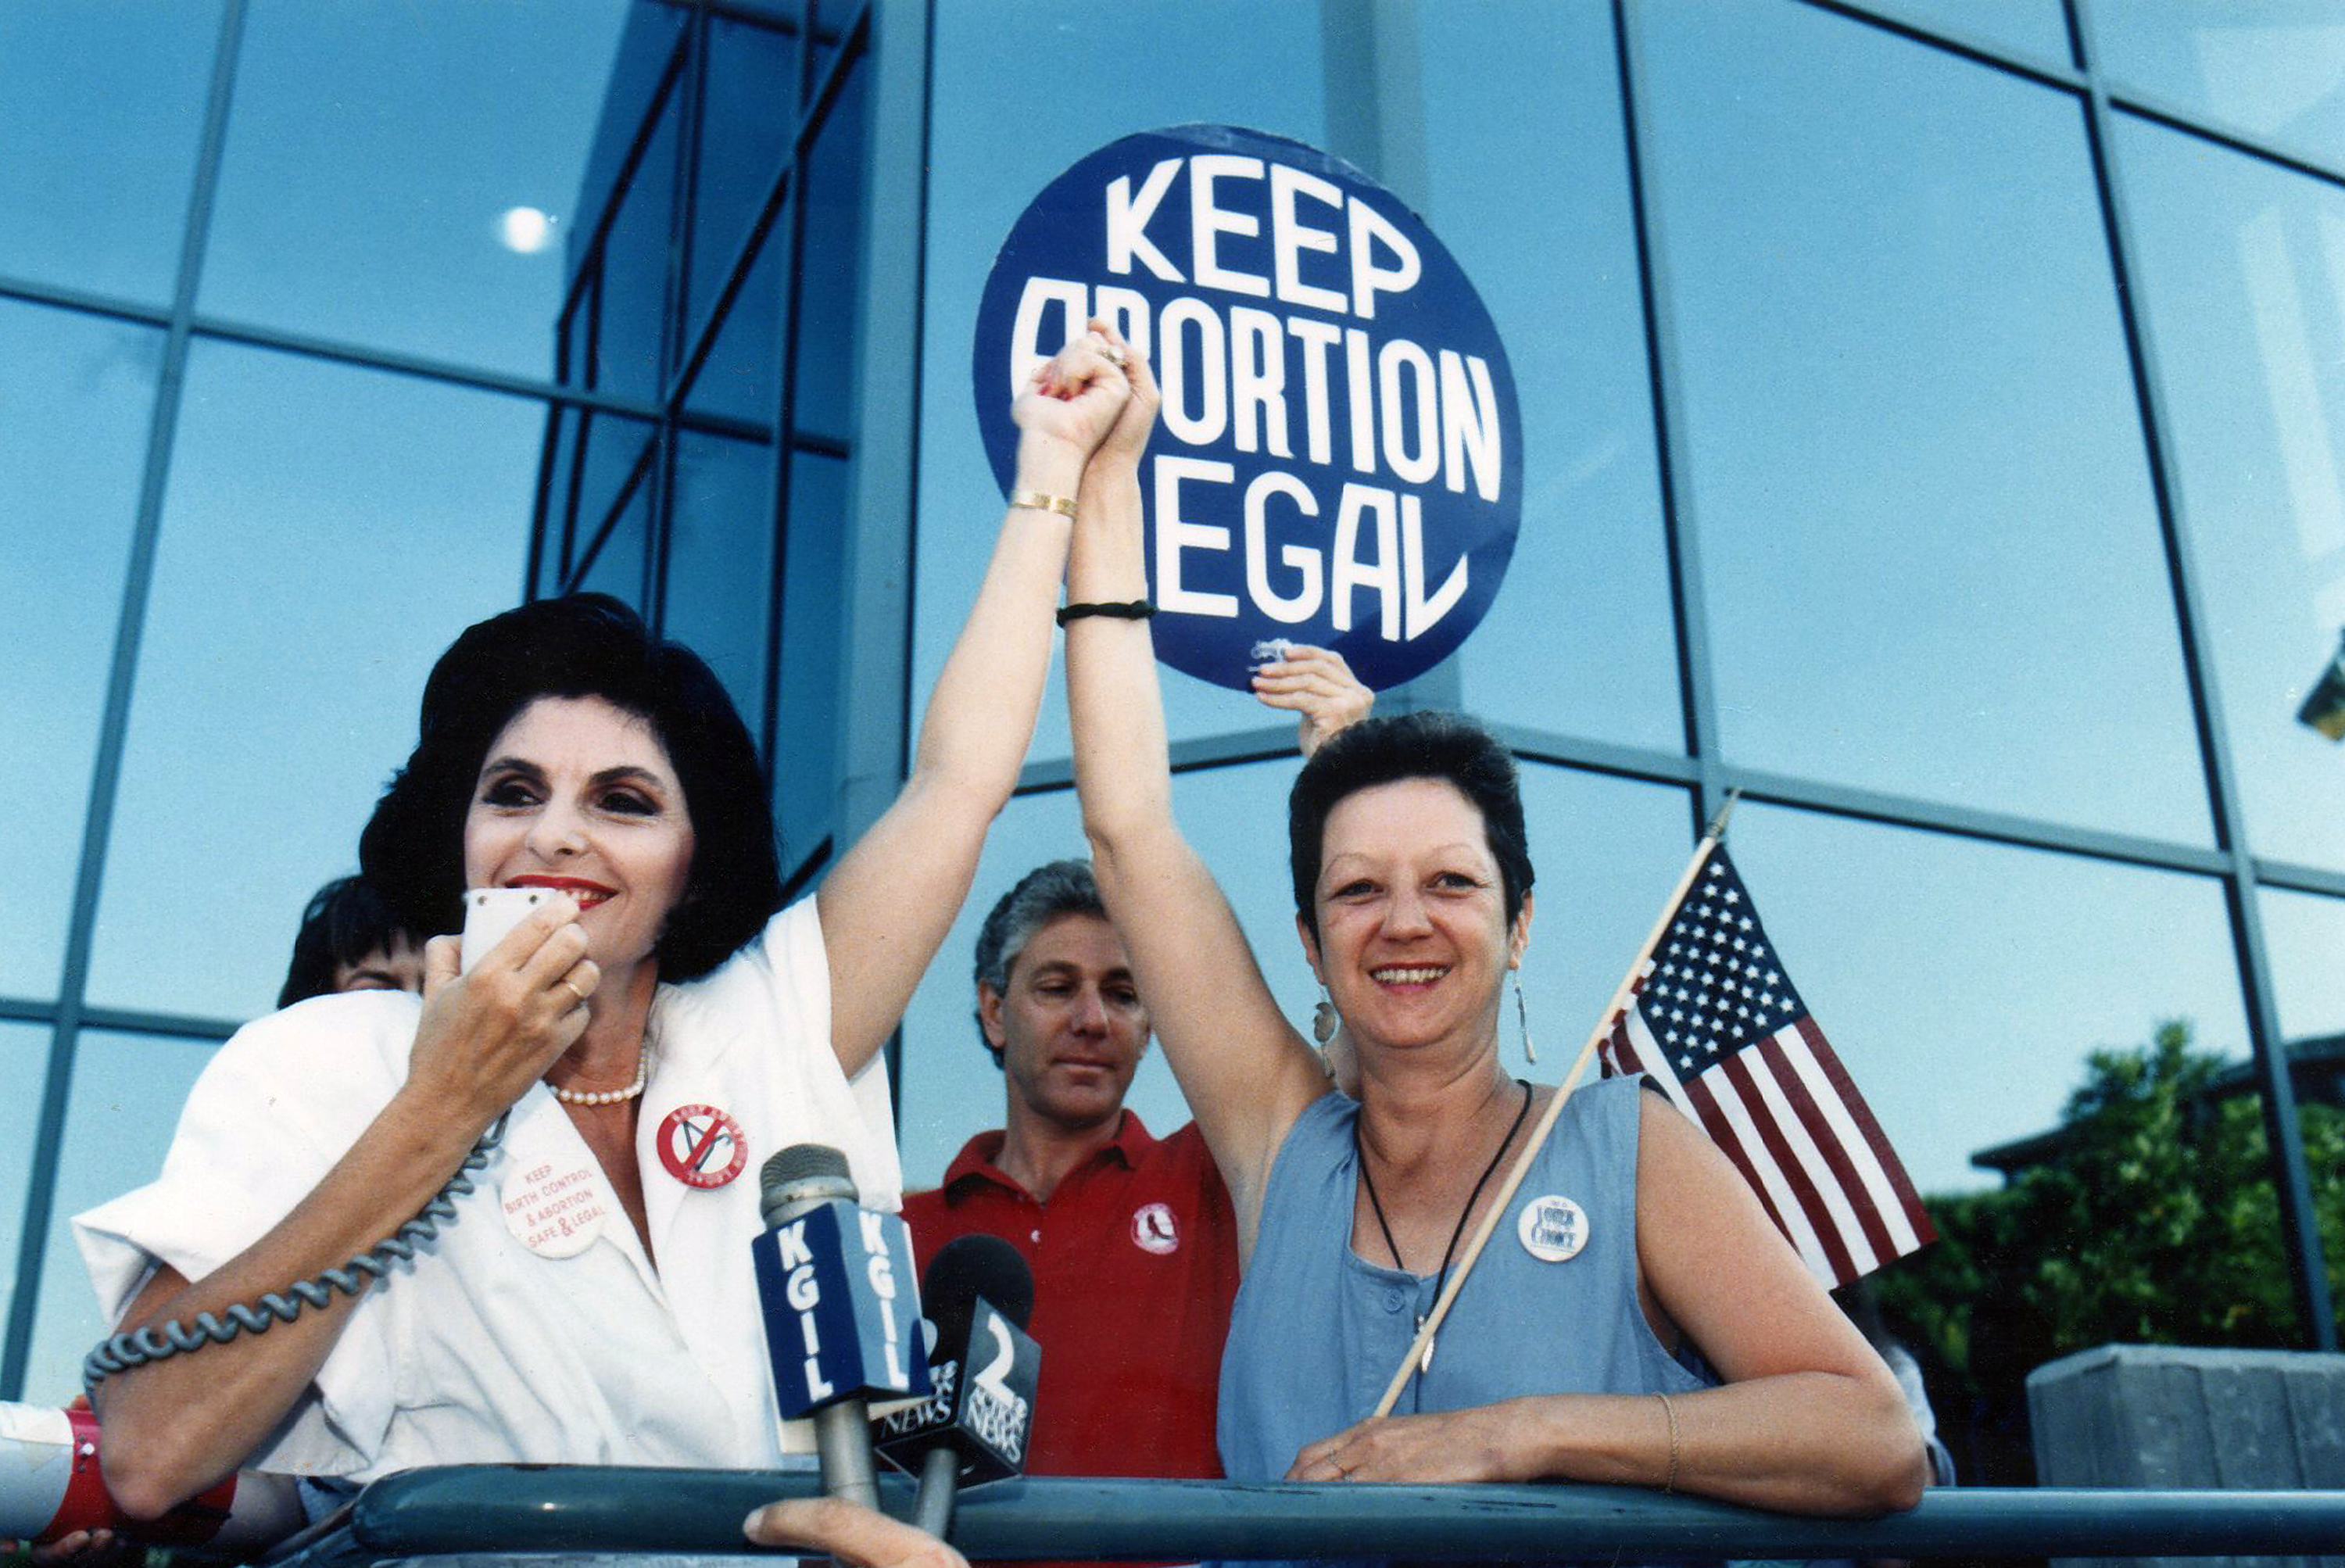 Attorney Gloria Allred and Norma McCorvey (R), the 'Jane Roe' plaintiff from the landmark court case Roe vs. Wade during an abortion rights rally, July 4, 1989 in Burbank, California. (Bob Riha, Jr.—Getty Images)